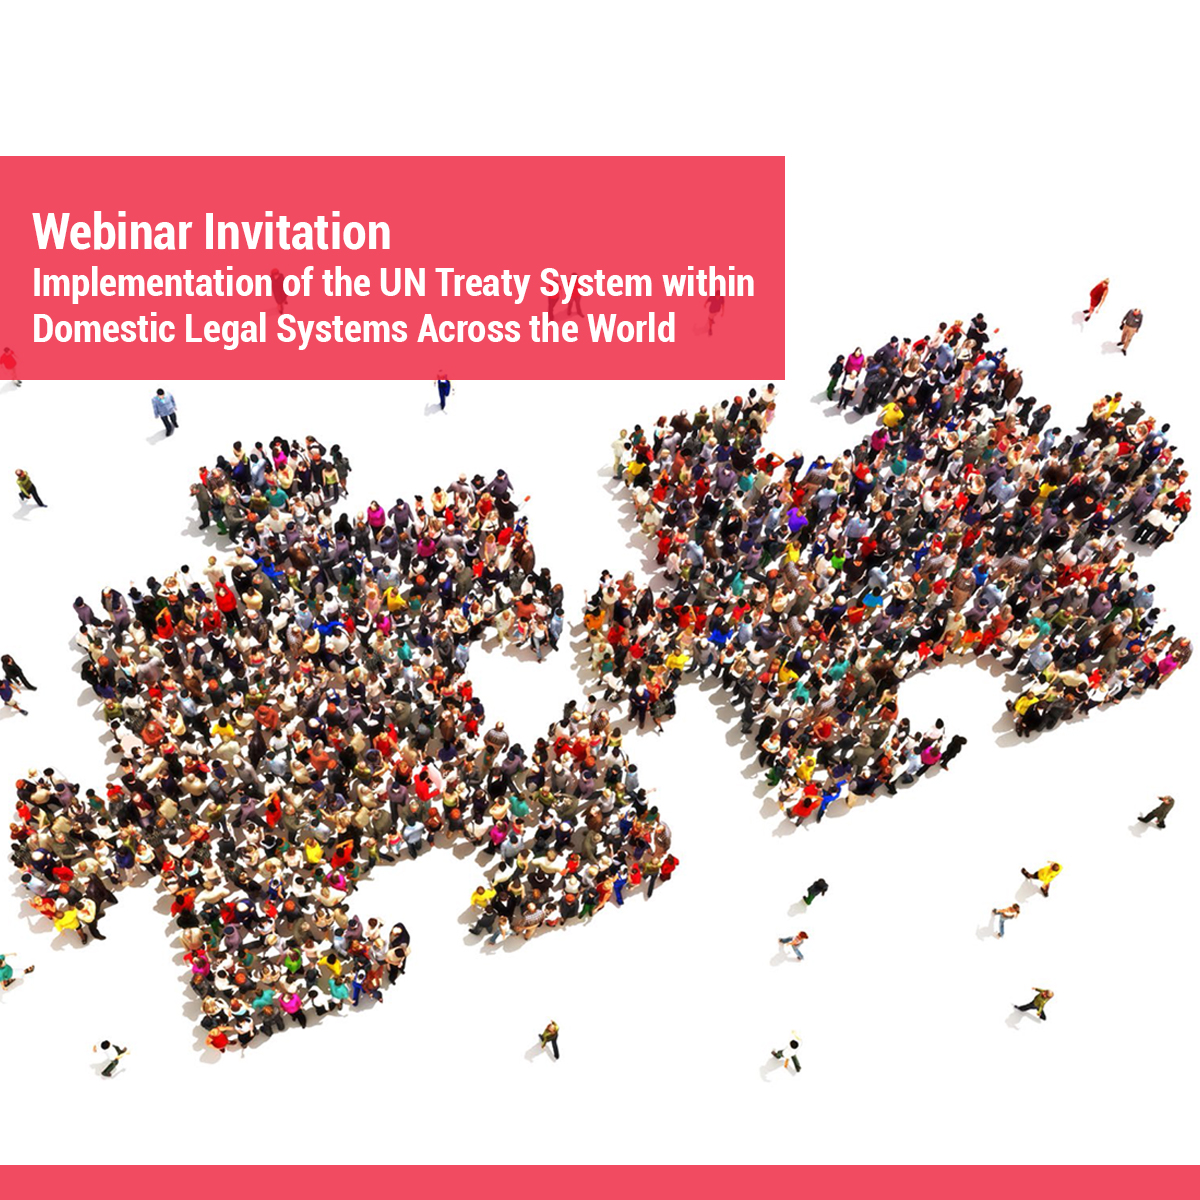 @CHR_HumanRights and the Norwegian Centre for Human Rights invite you to an online seminar on the implementation of the @UN treaty system within domestic legal systems of the world. Join us on 15 May 202, 13:00-16:00 (SAST). Register on Zoom: chr.up.ac.za/latest-news/37…